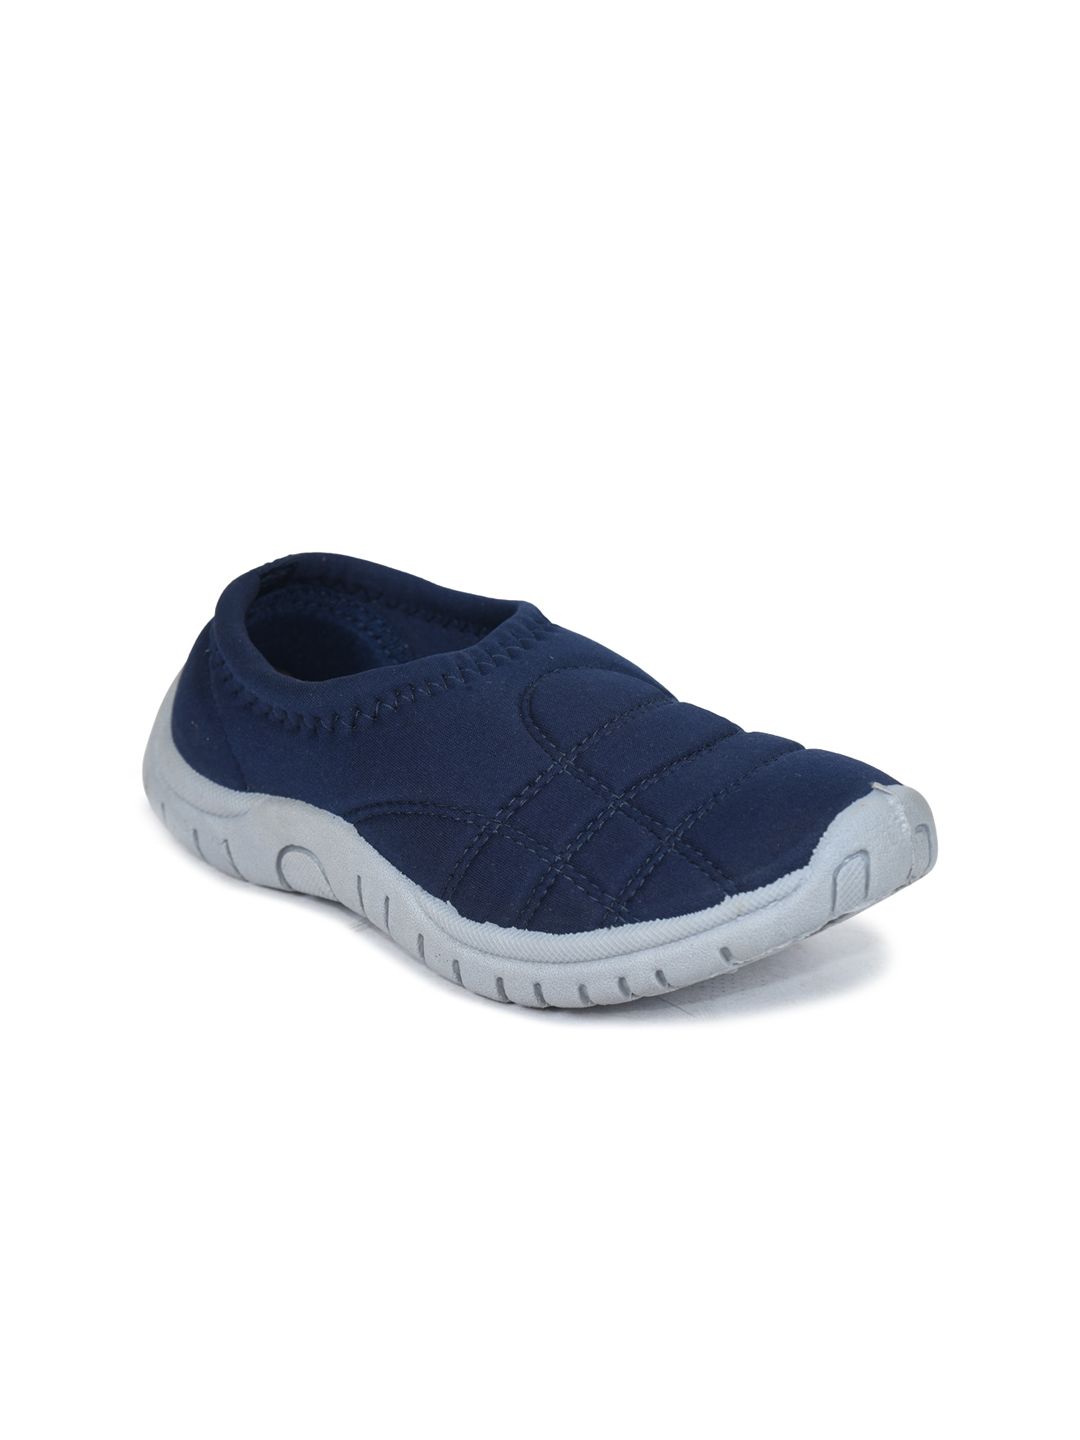 Ajanta Women Lightweight Comfort Insole Contrast Sole Slip-On Sneakers Price in India